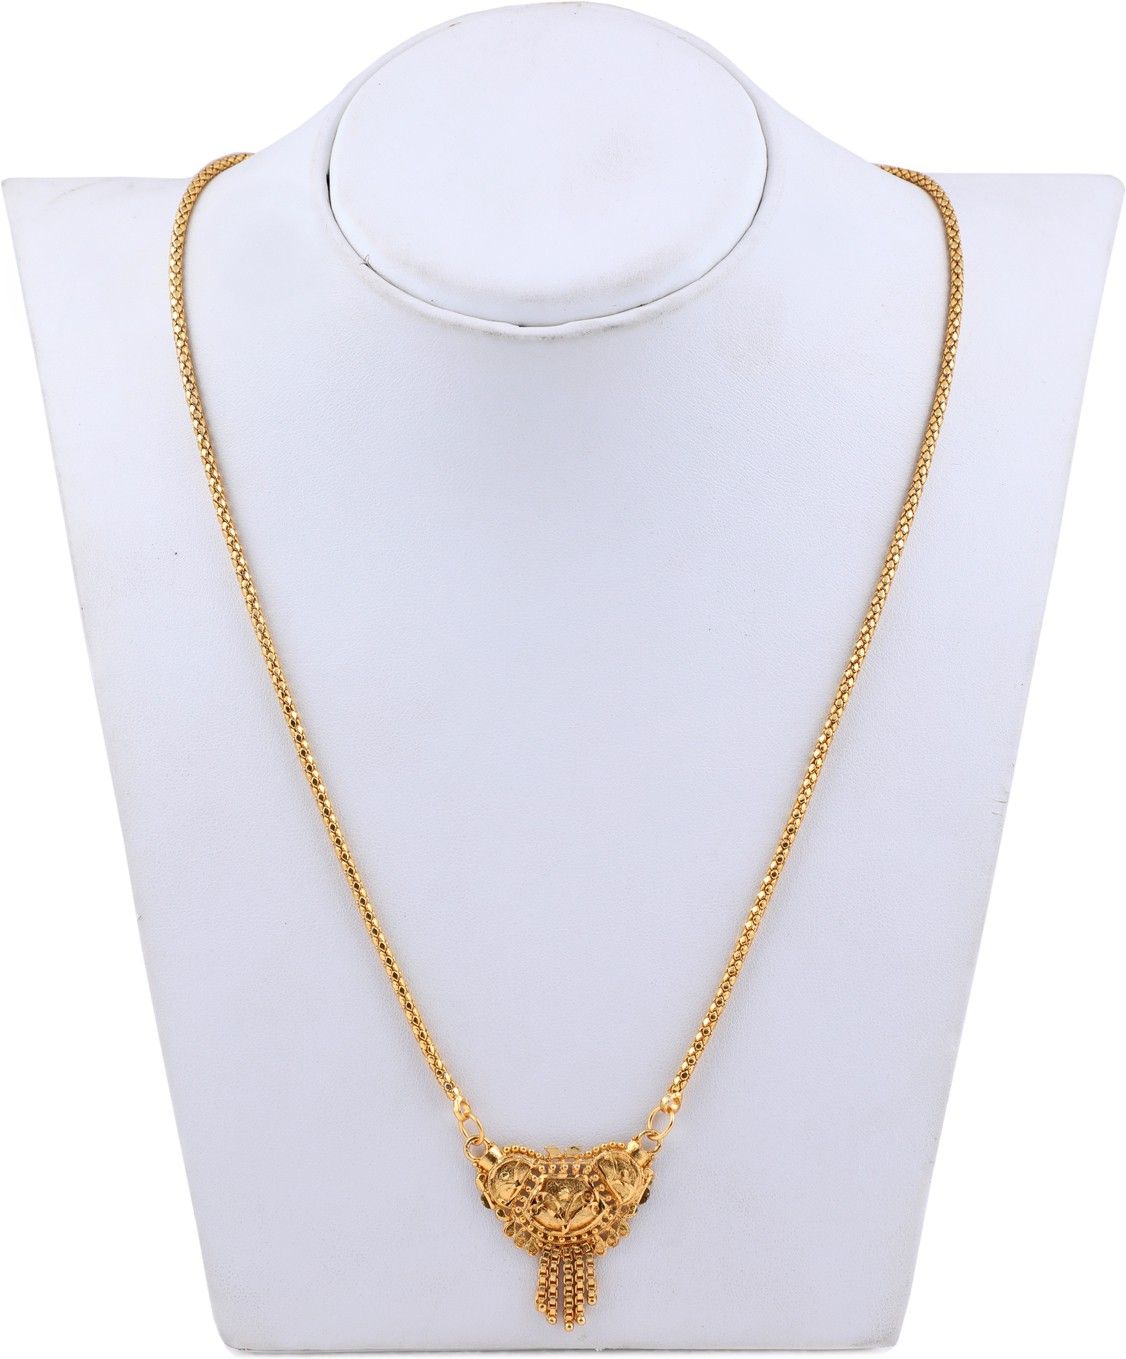 Pretty Gold Plated Necklace